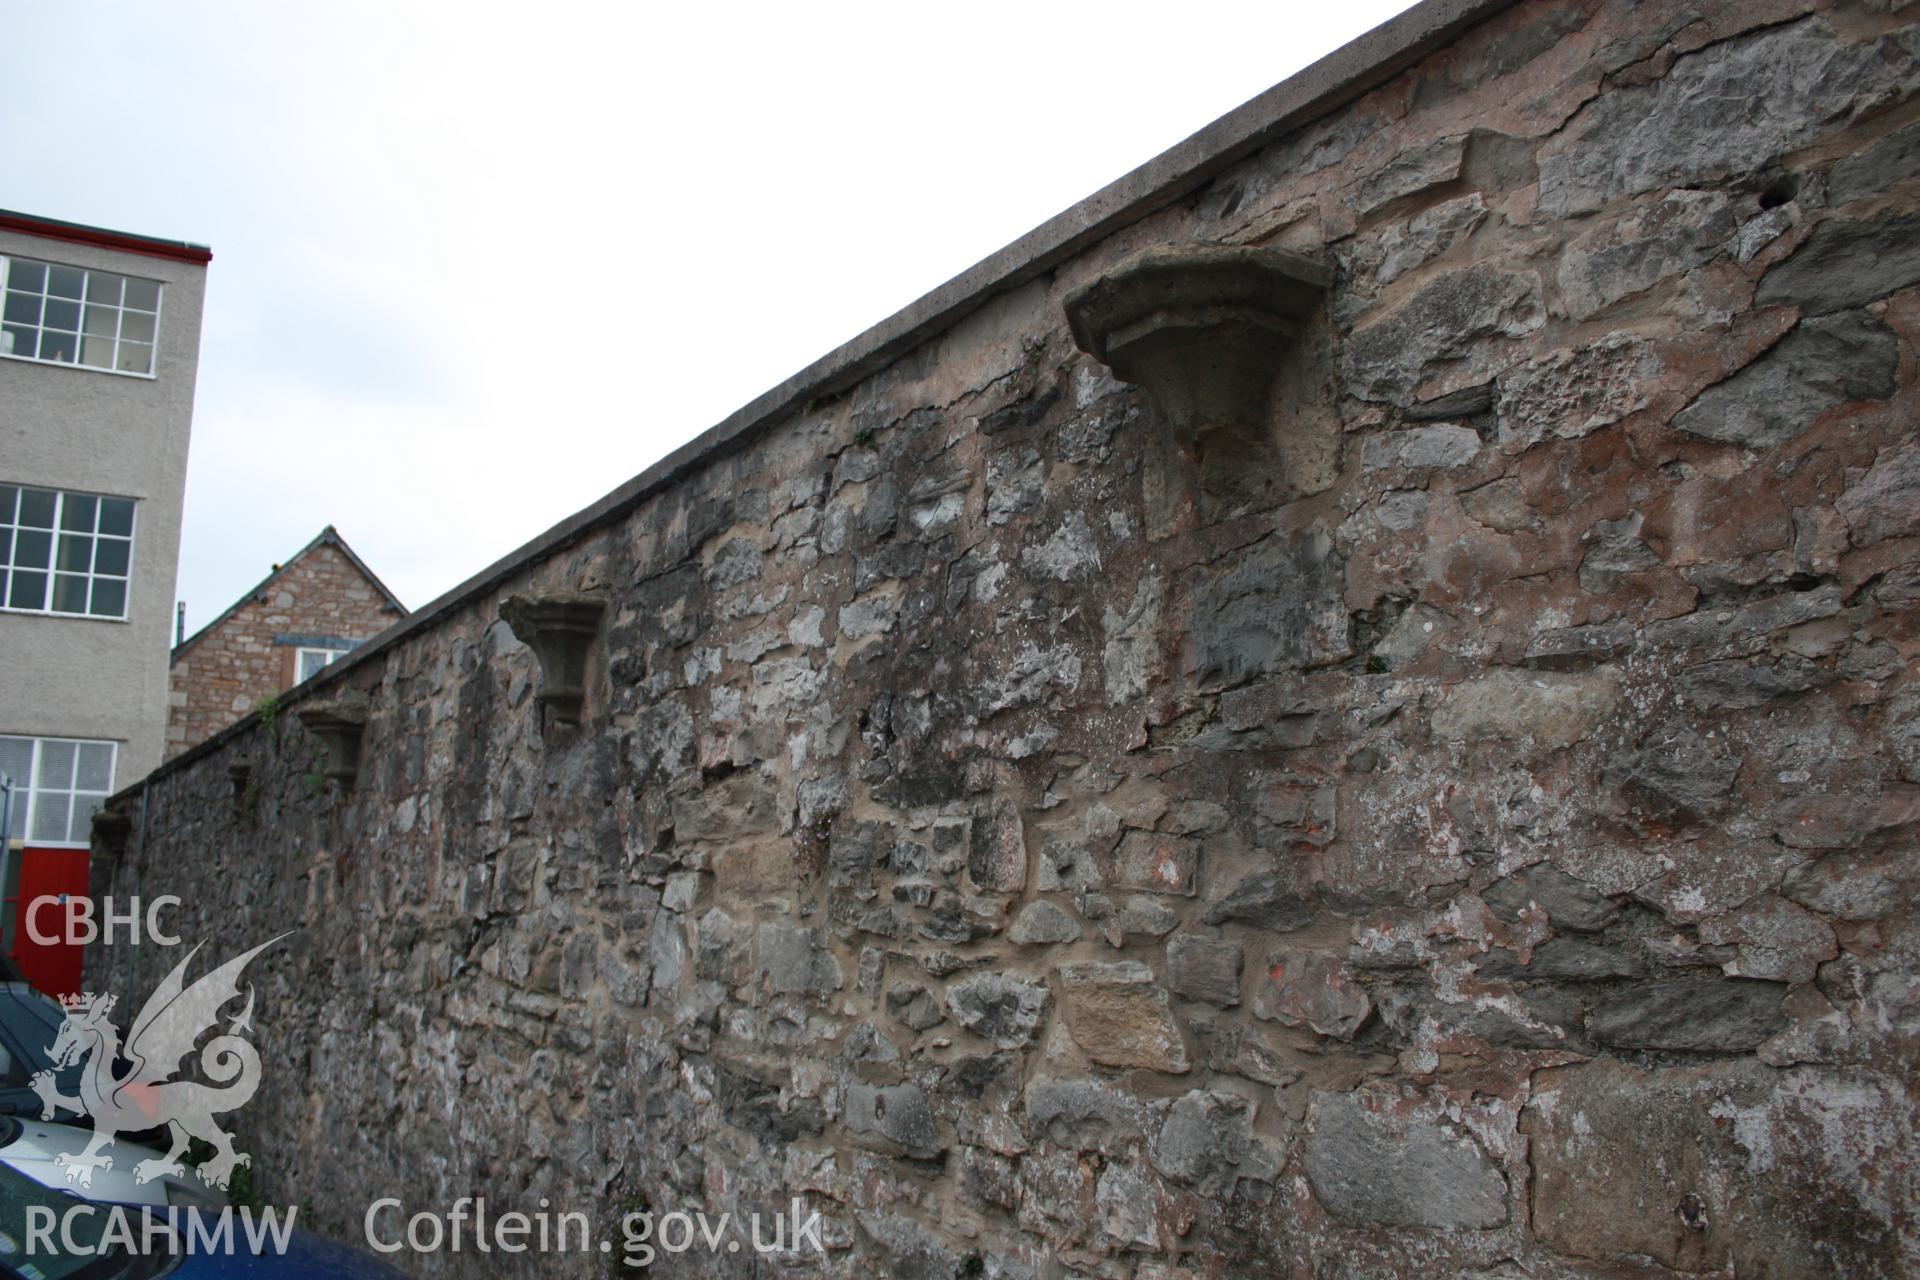 Colour photograph showing exterior view of stone wall at the old butcher's market, Denbigh borough market. Photographed during survey conducted by Geoff Ward, circa 2010.